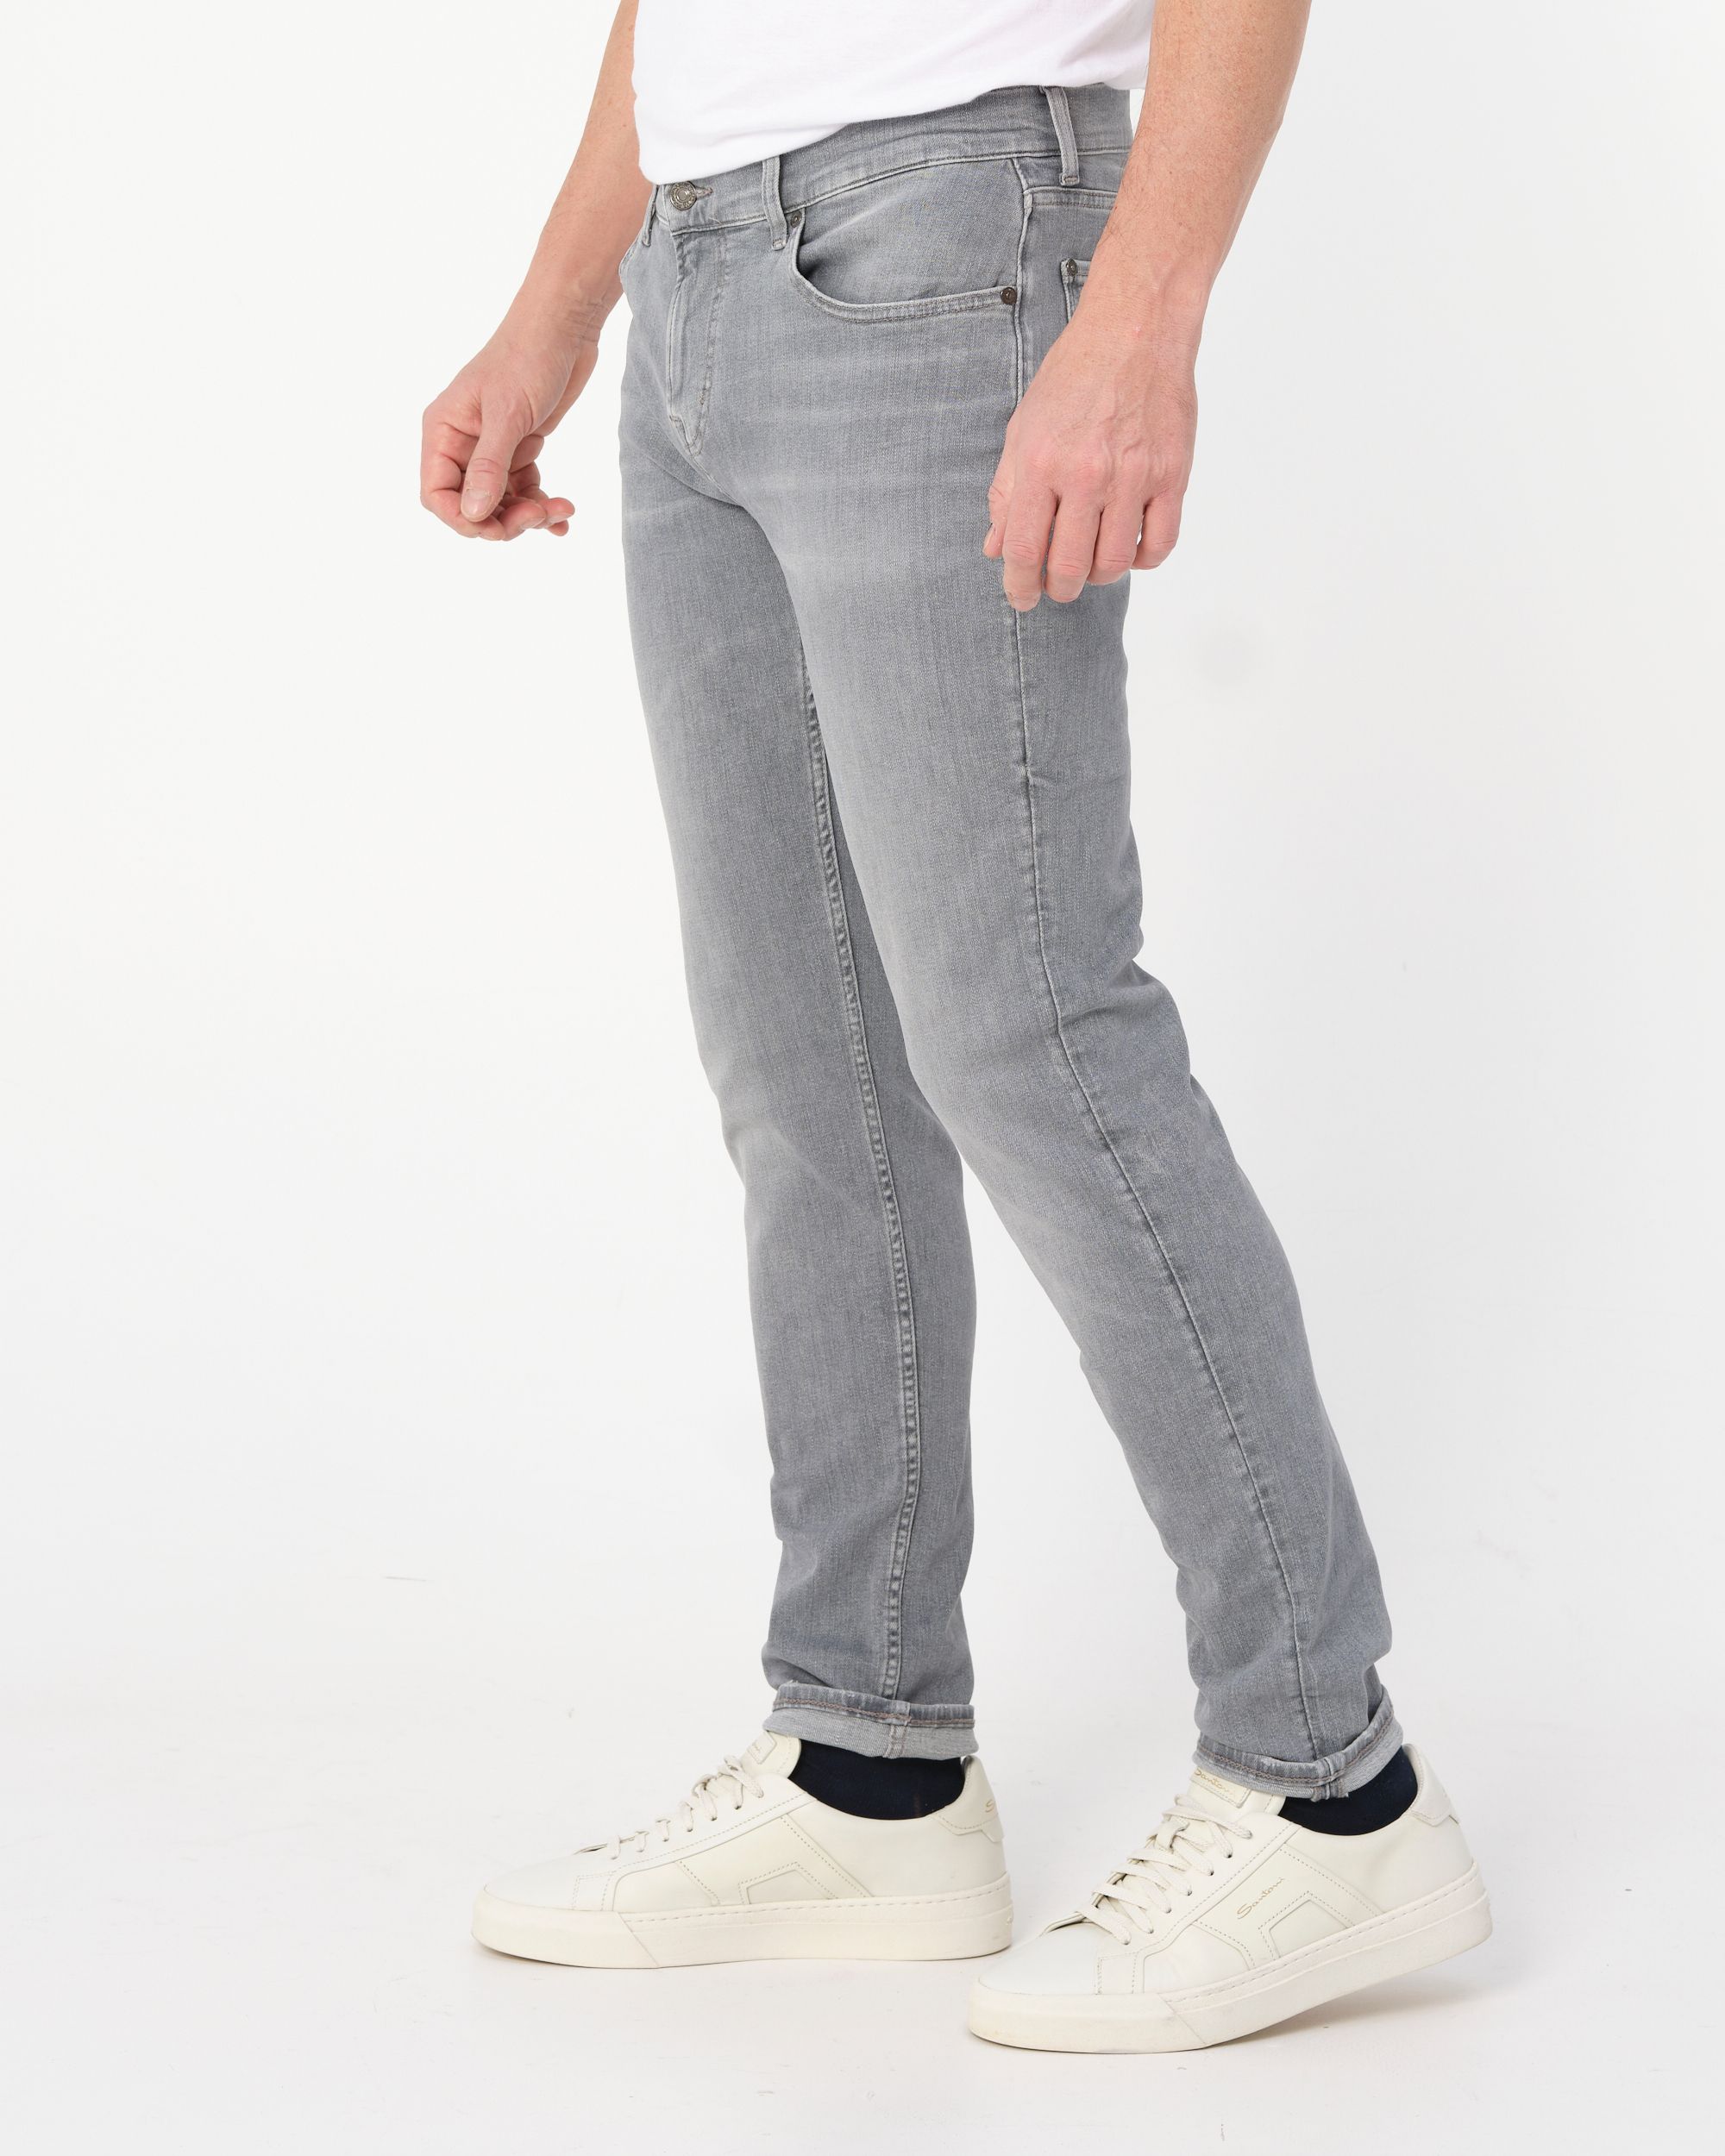 Seven for all mankind Jeans Grijs 091550-001-30